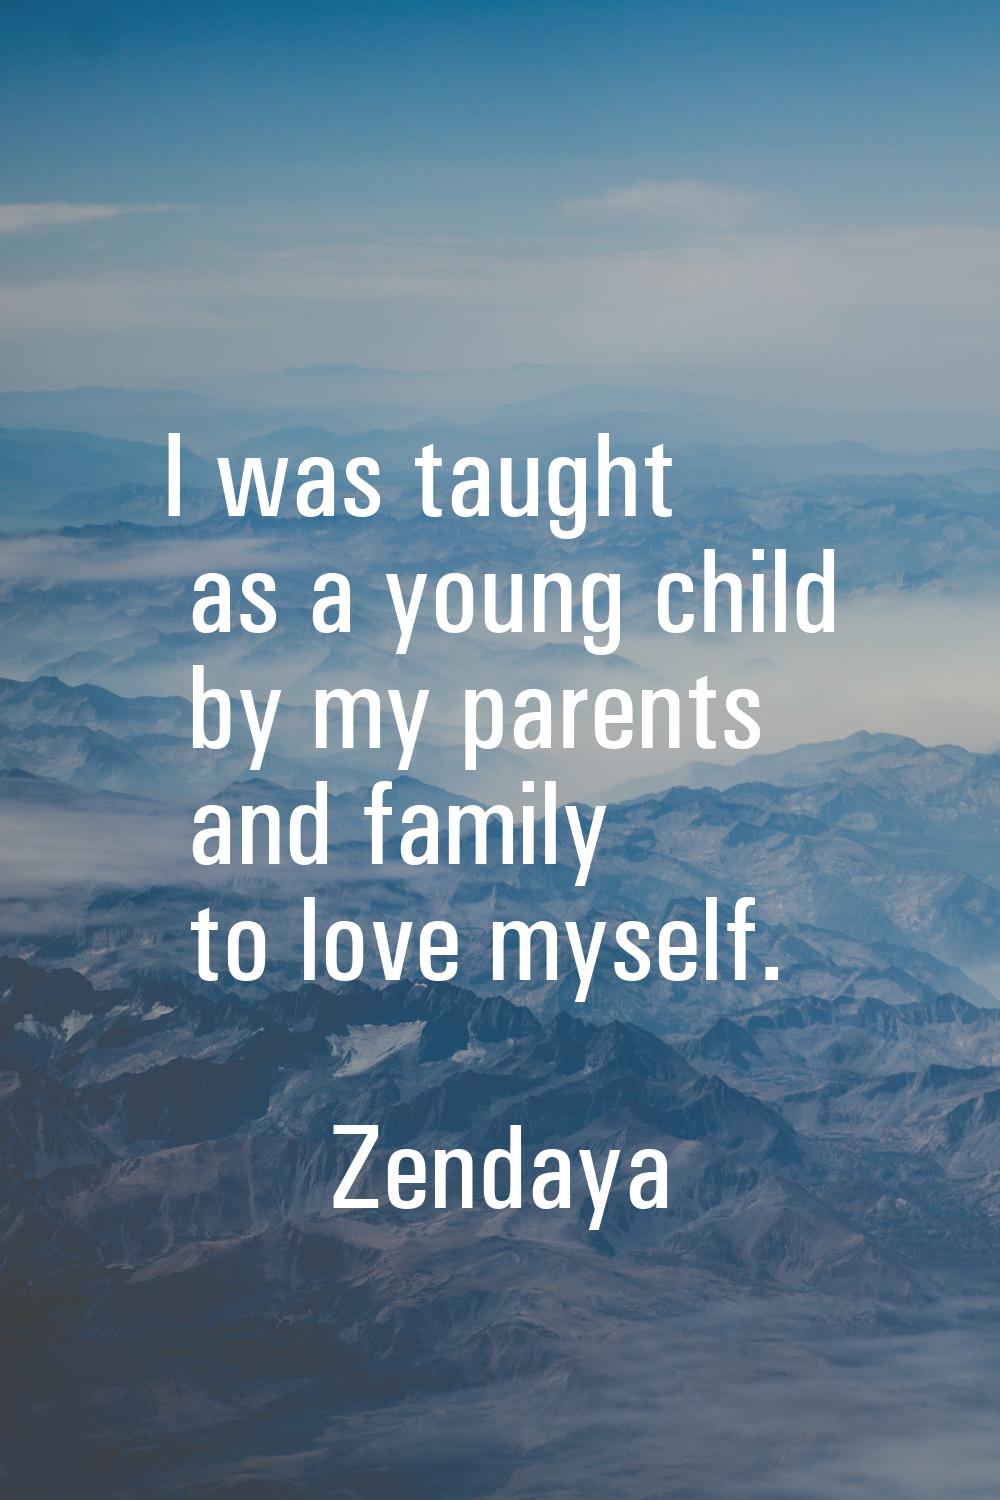 I was taught as a young child by my parents and family to love myself.